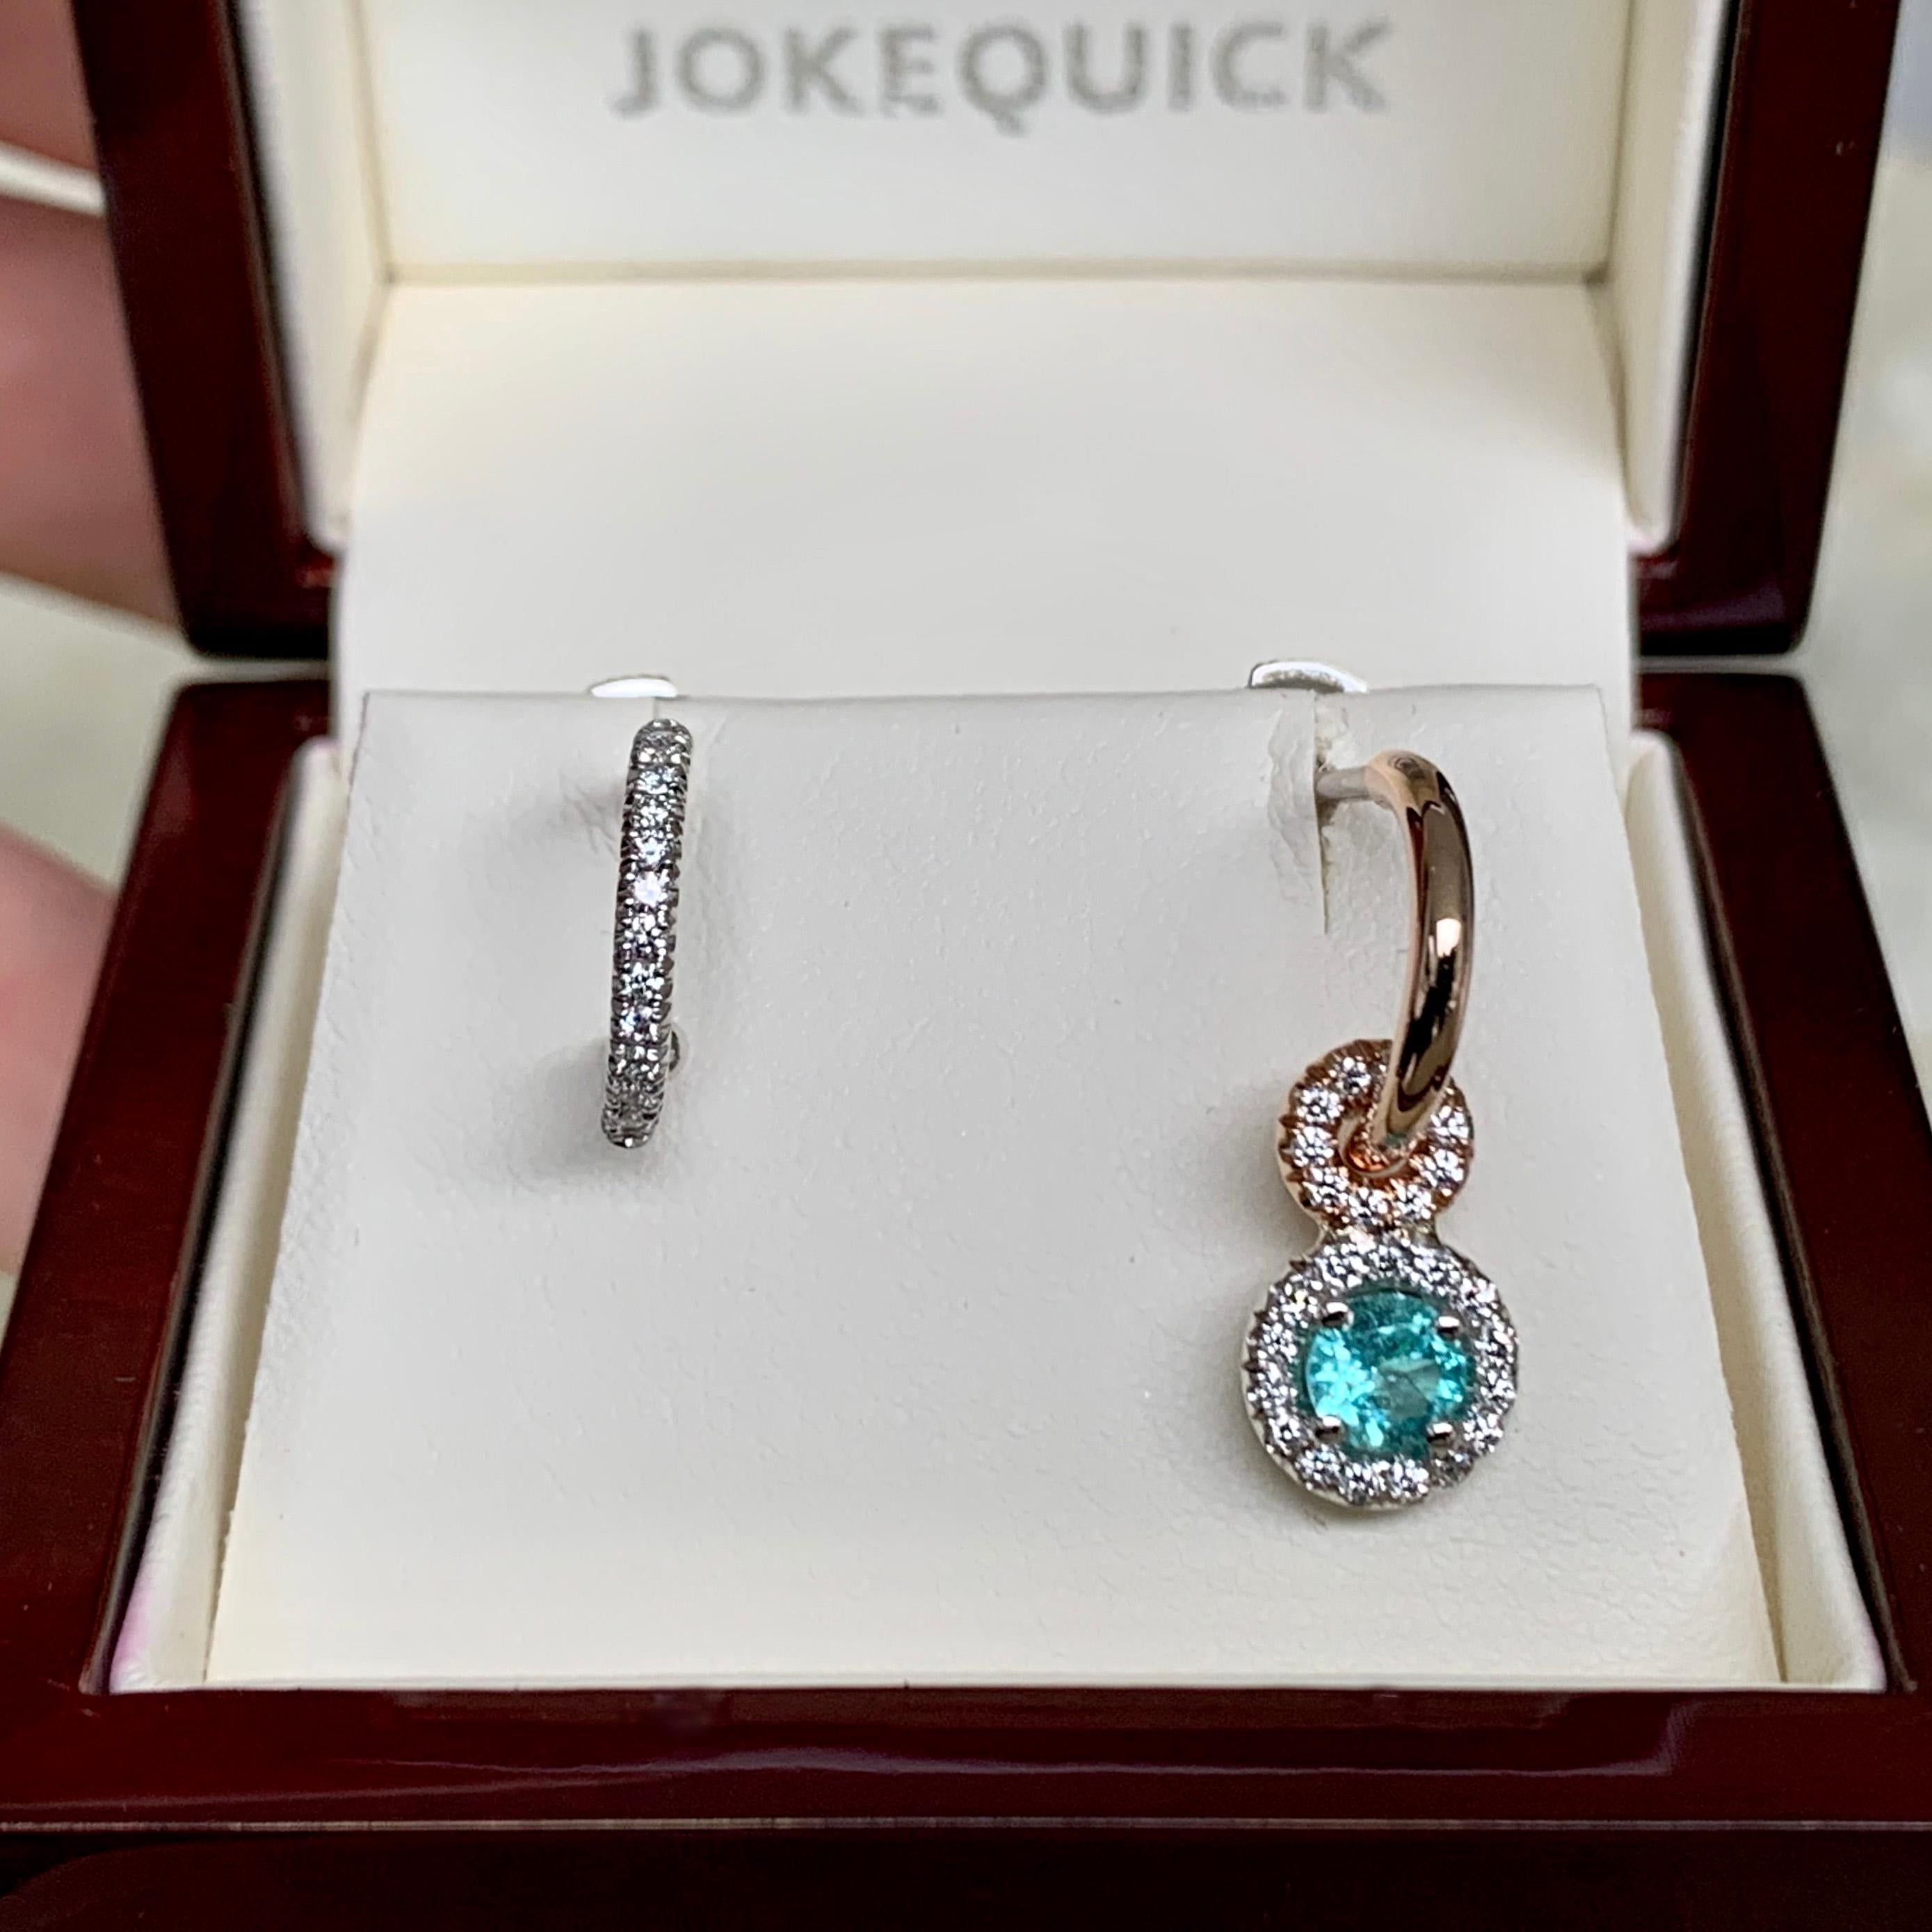 Mismatched Hoop earrings handmade in Belgium by jewelry artist Joke Quick, in solid 18K rose & white gold and handmade the traditional way ( no casting or printing involved ).
One of the two hoop earrings is made in White gold and set with White